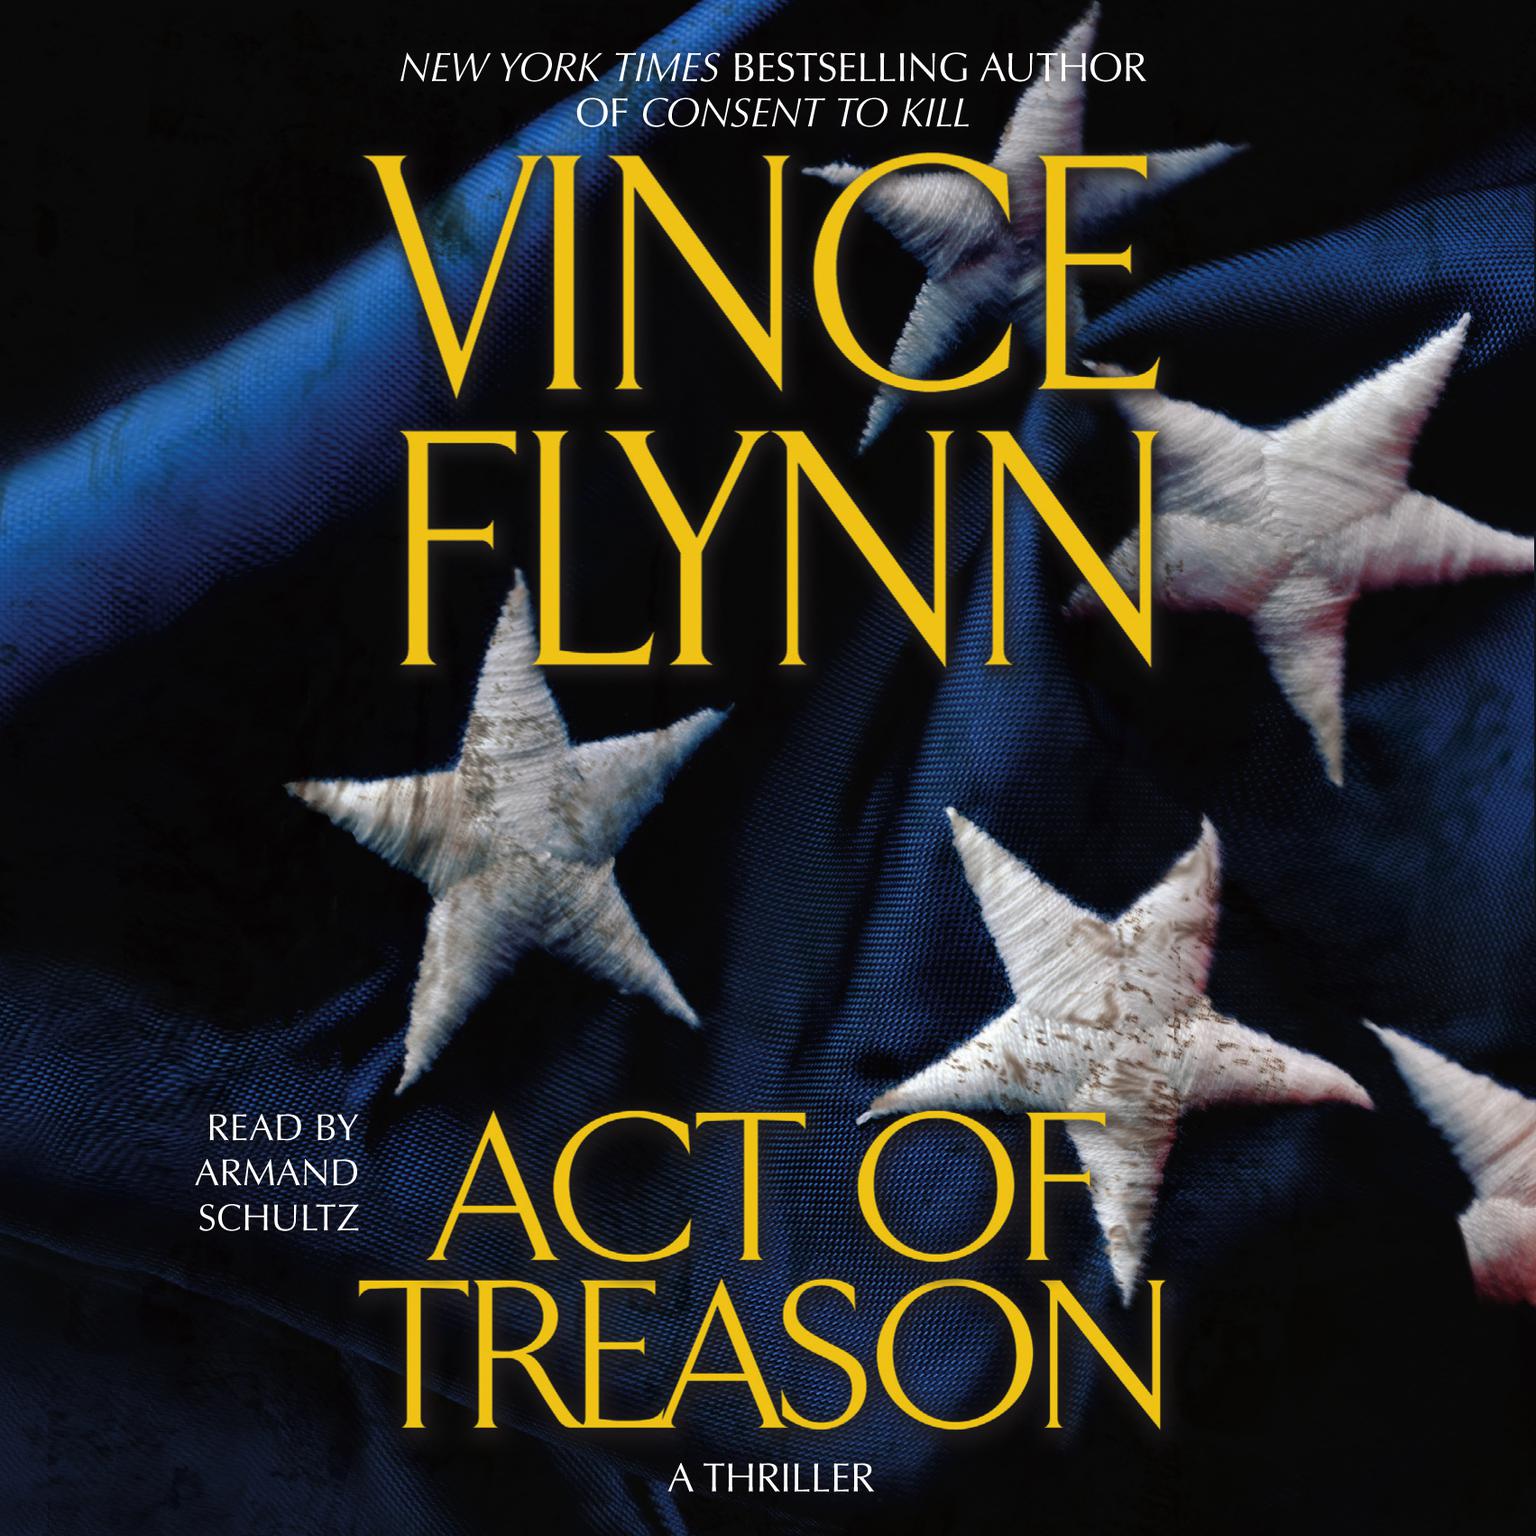 Act of Treason (Abridged) Audiobook, by Vince Flynn